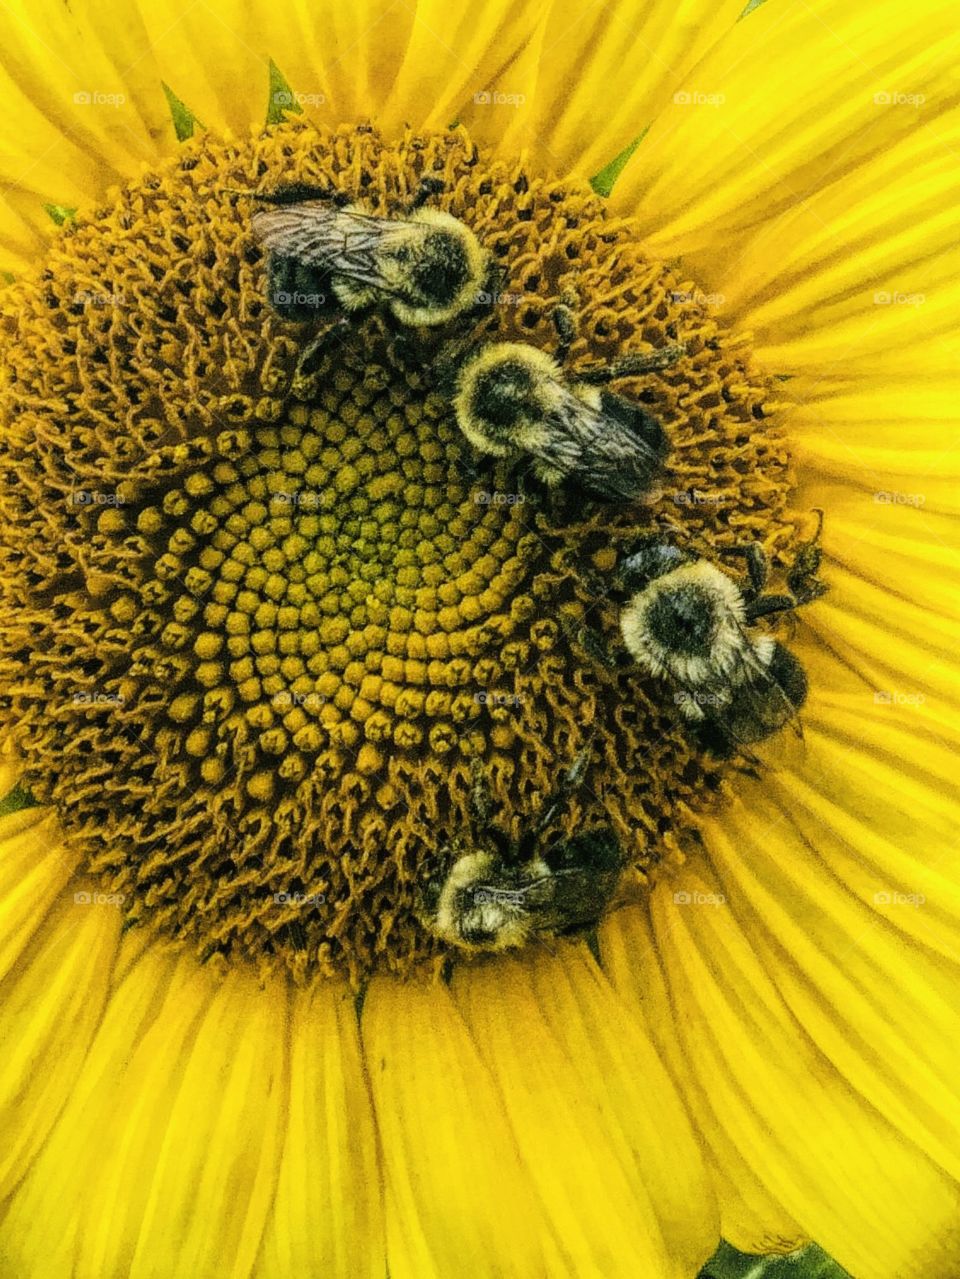 Bees pollinating a sunflower 